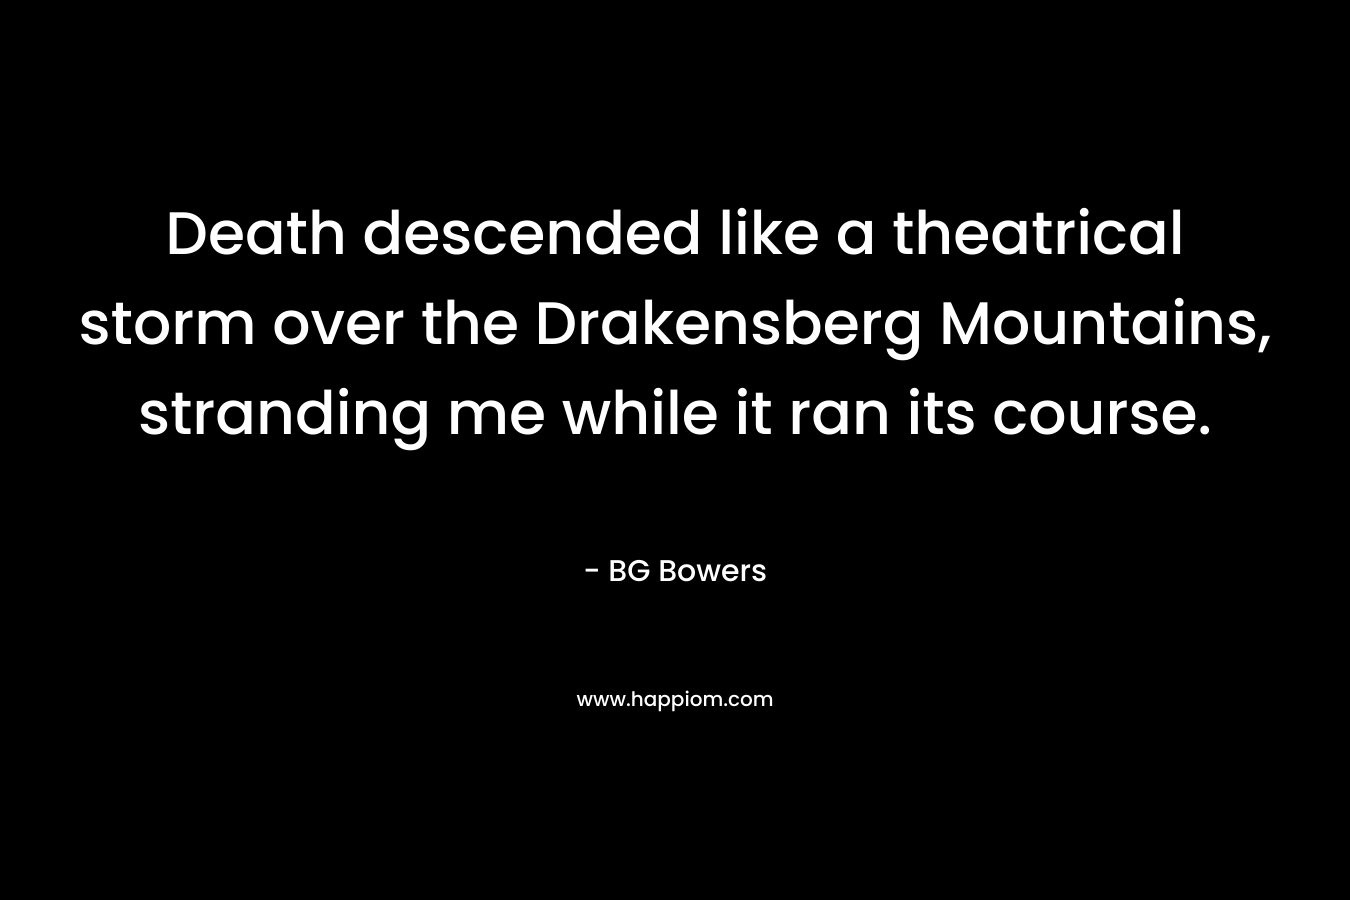 Death descended like a theatrical storm over the Drakensberg Mountains, stranding me while it ran its course. – BG Bowers